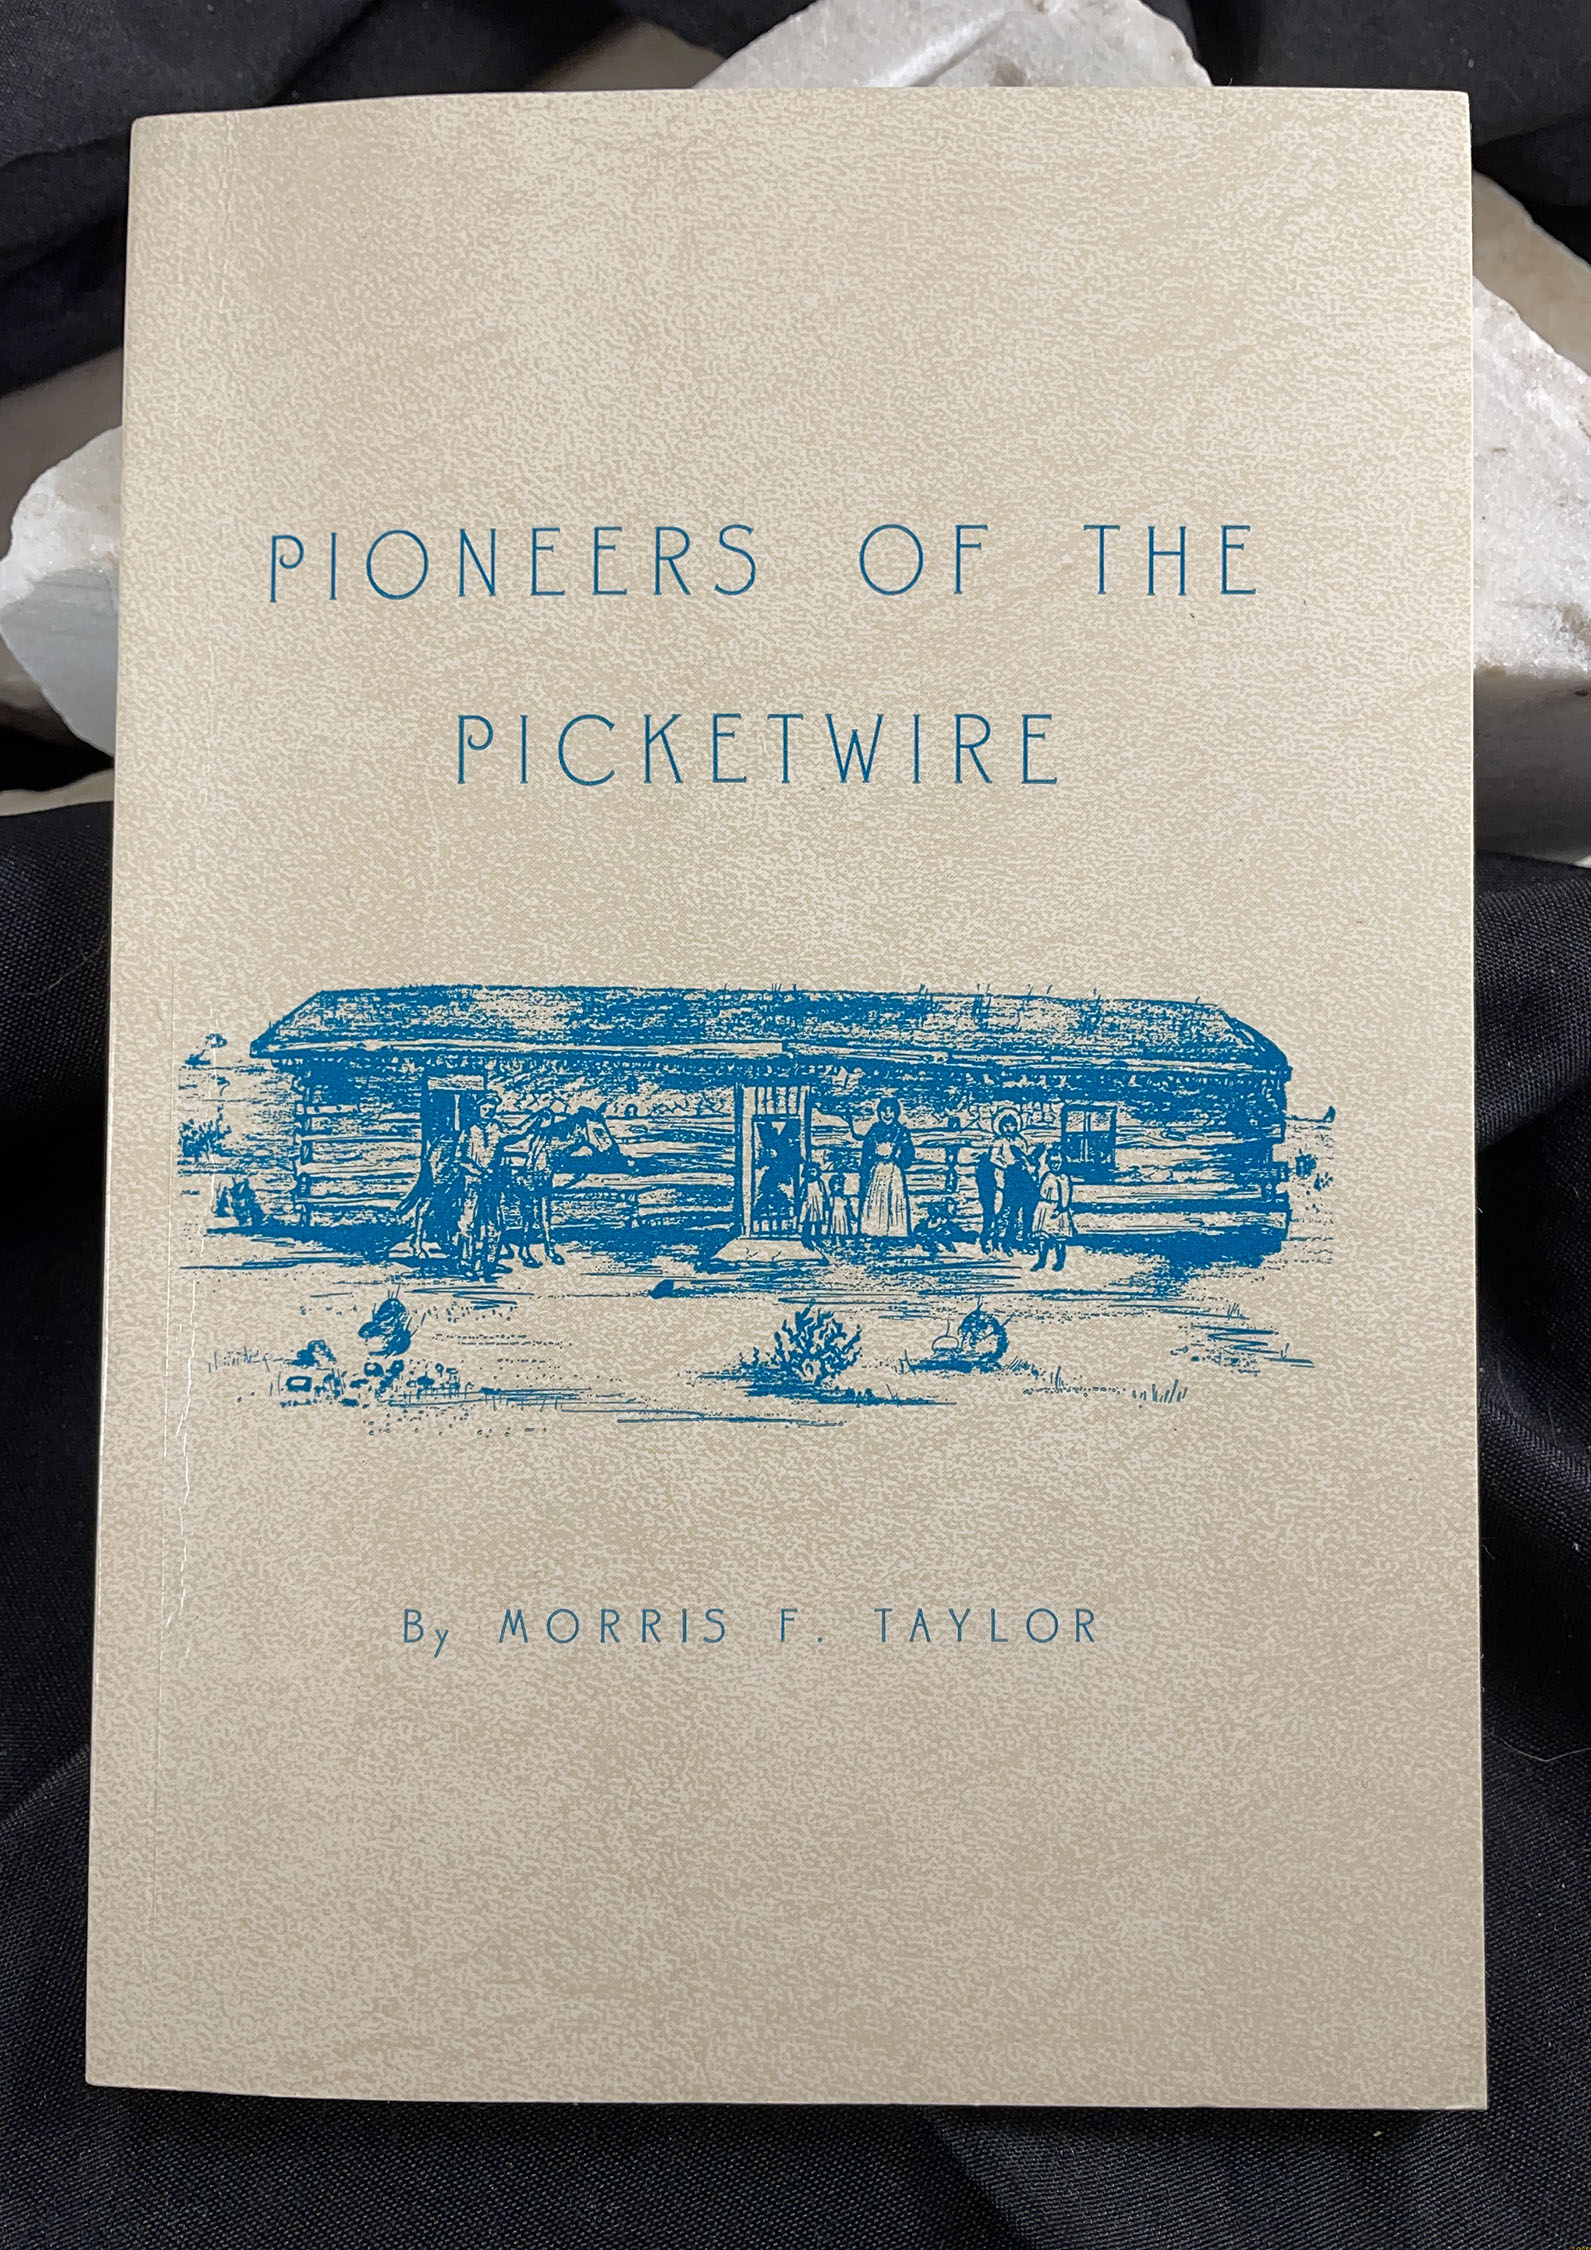 PIONEERS OF THE PICKETWIRE by MORRIS F. TAYLOR 1st edition signed by author 1964